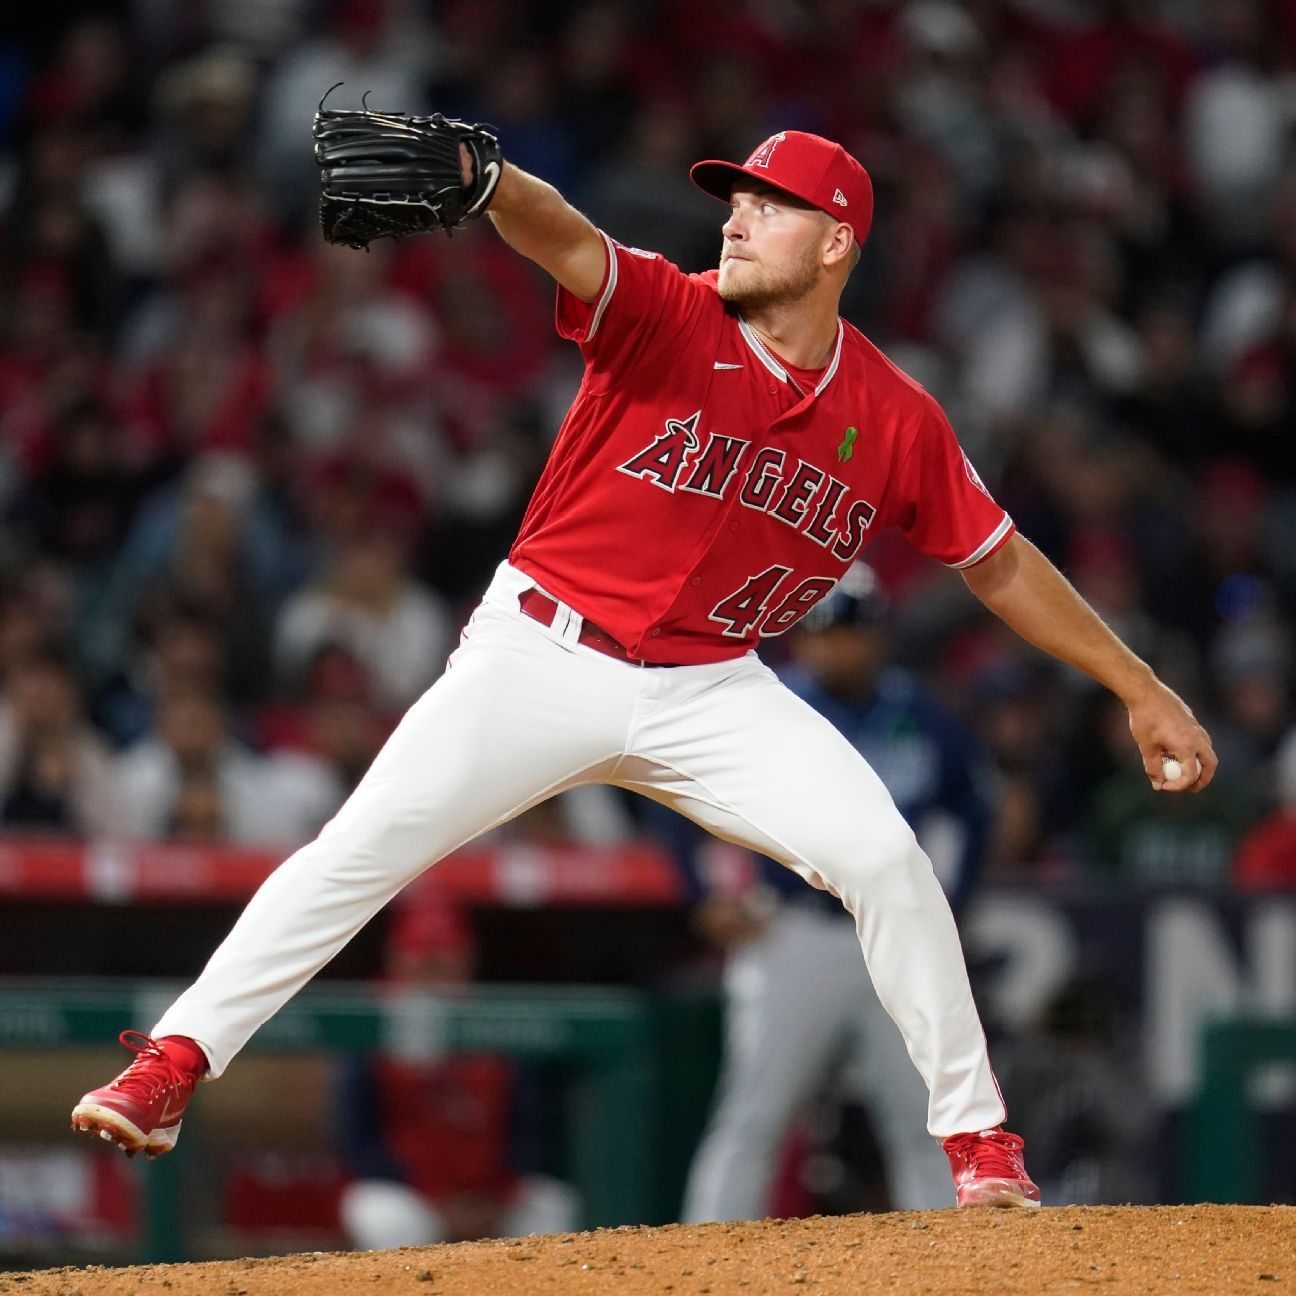 Angels rookie Detmers throws no-hitter vs. Rays